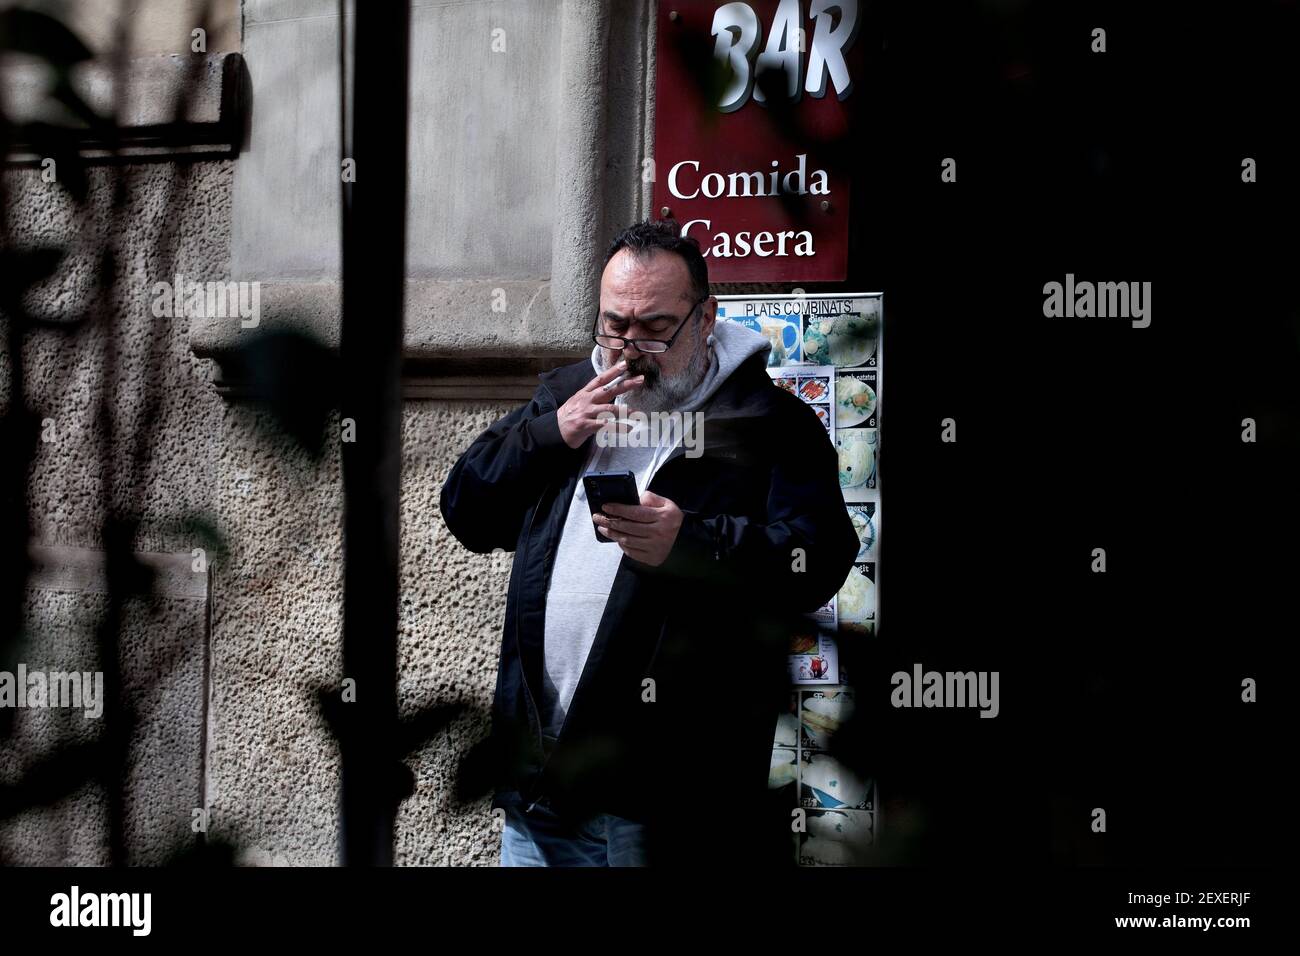 Man smoking and looking at his mobile phone, Barcelona, Spain. Stock Photo